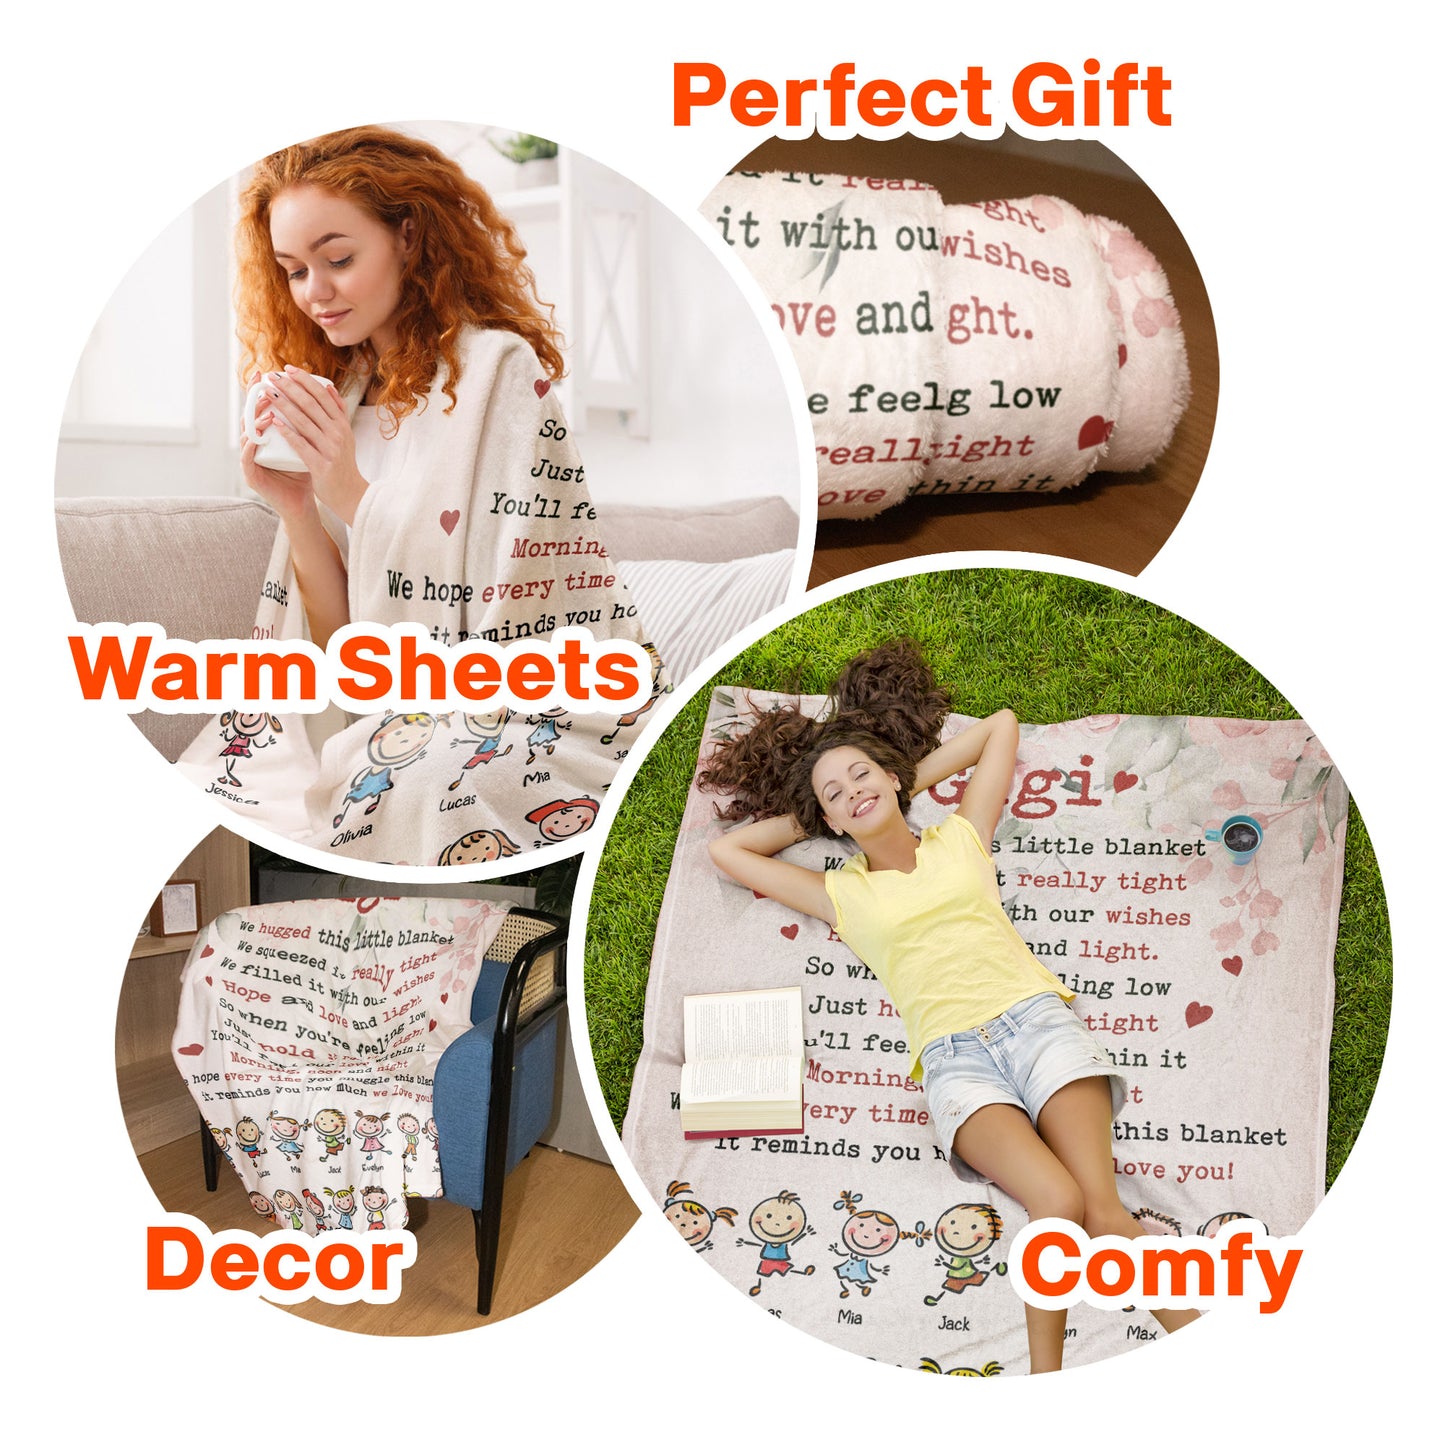 We Hugged This Little Blanket - Up To 14 Kids - Personalized Blanket